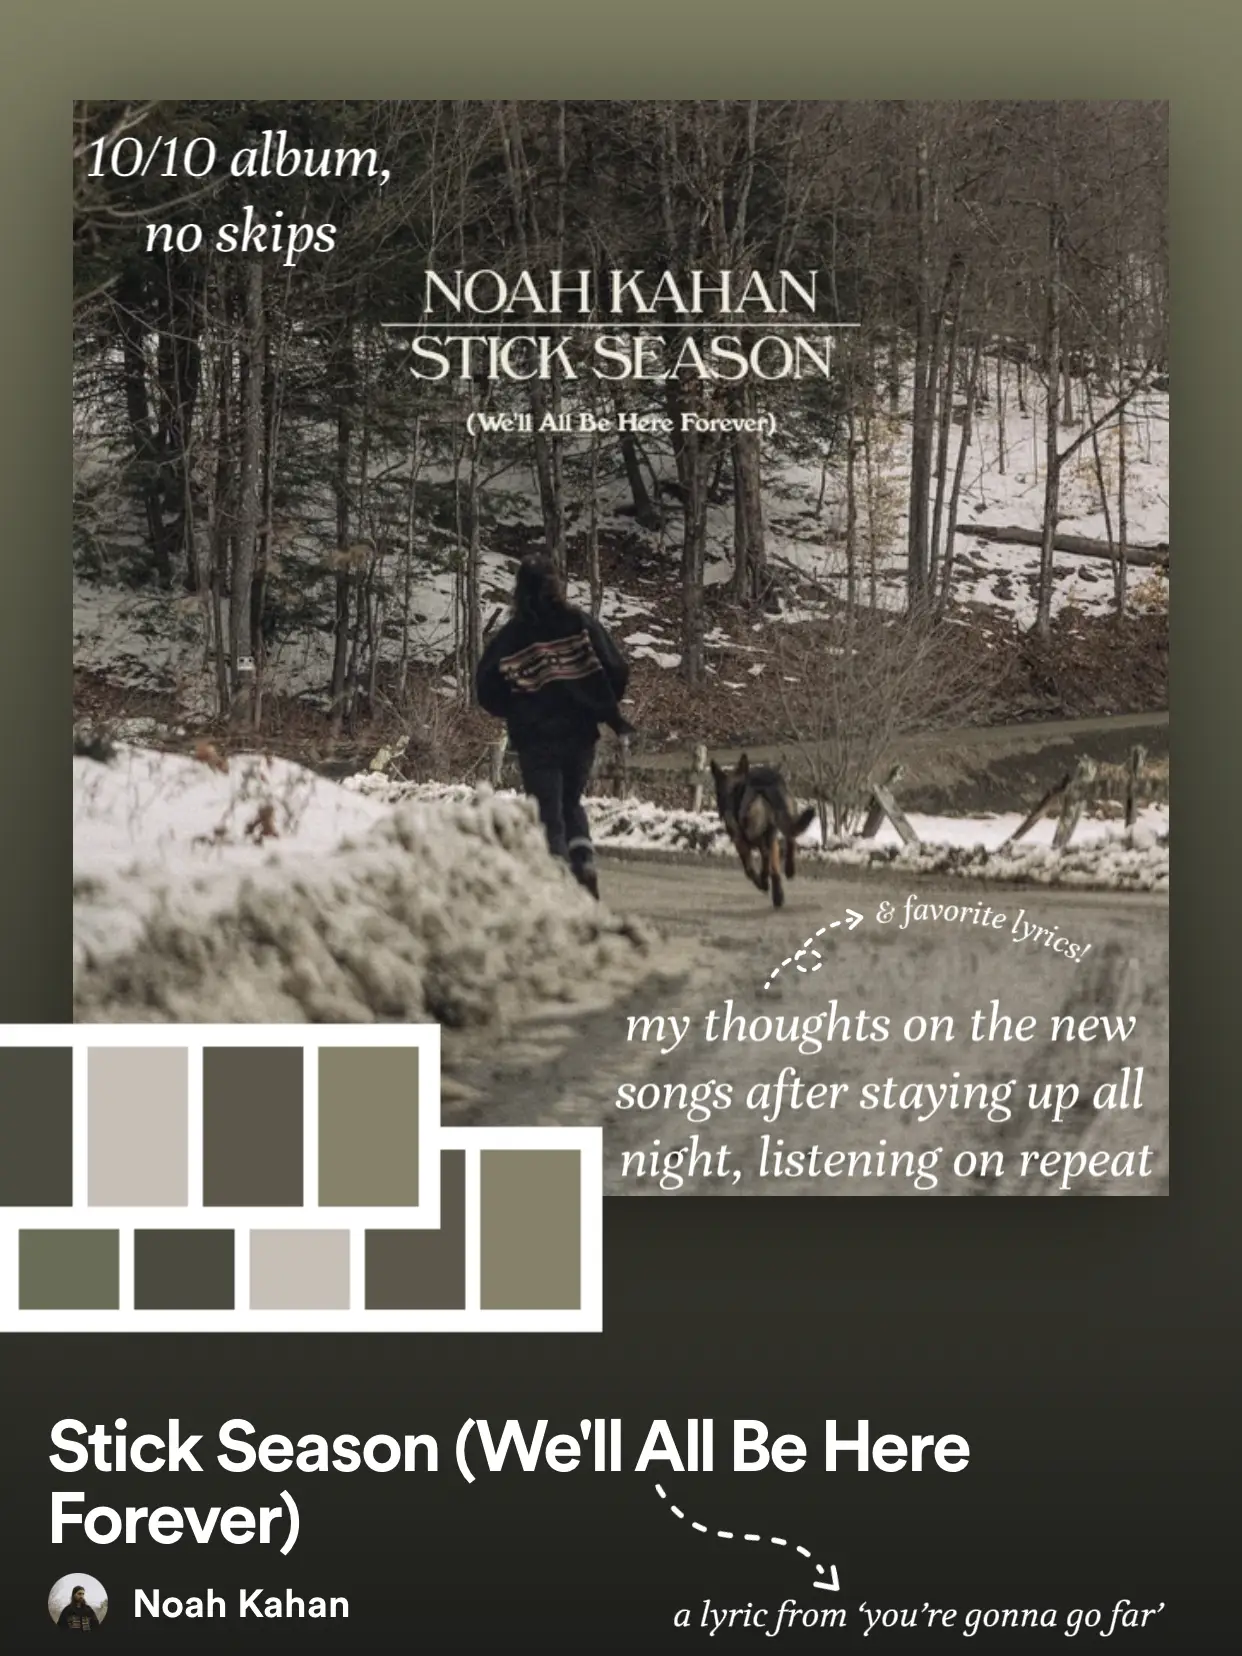 Unboxing one of our all-time favorites: Noah Kahan - Stick Season